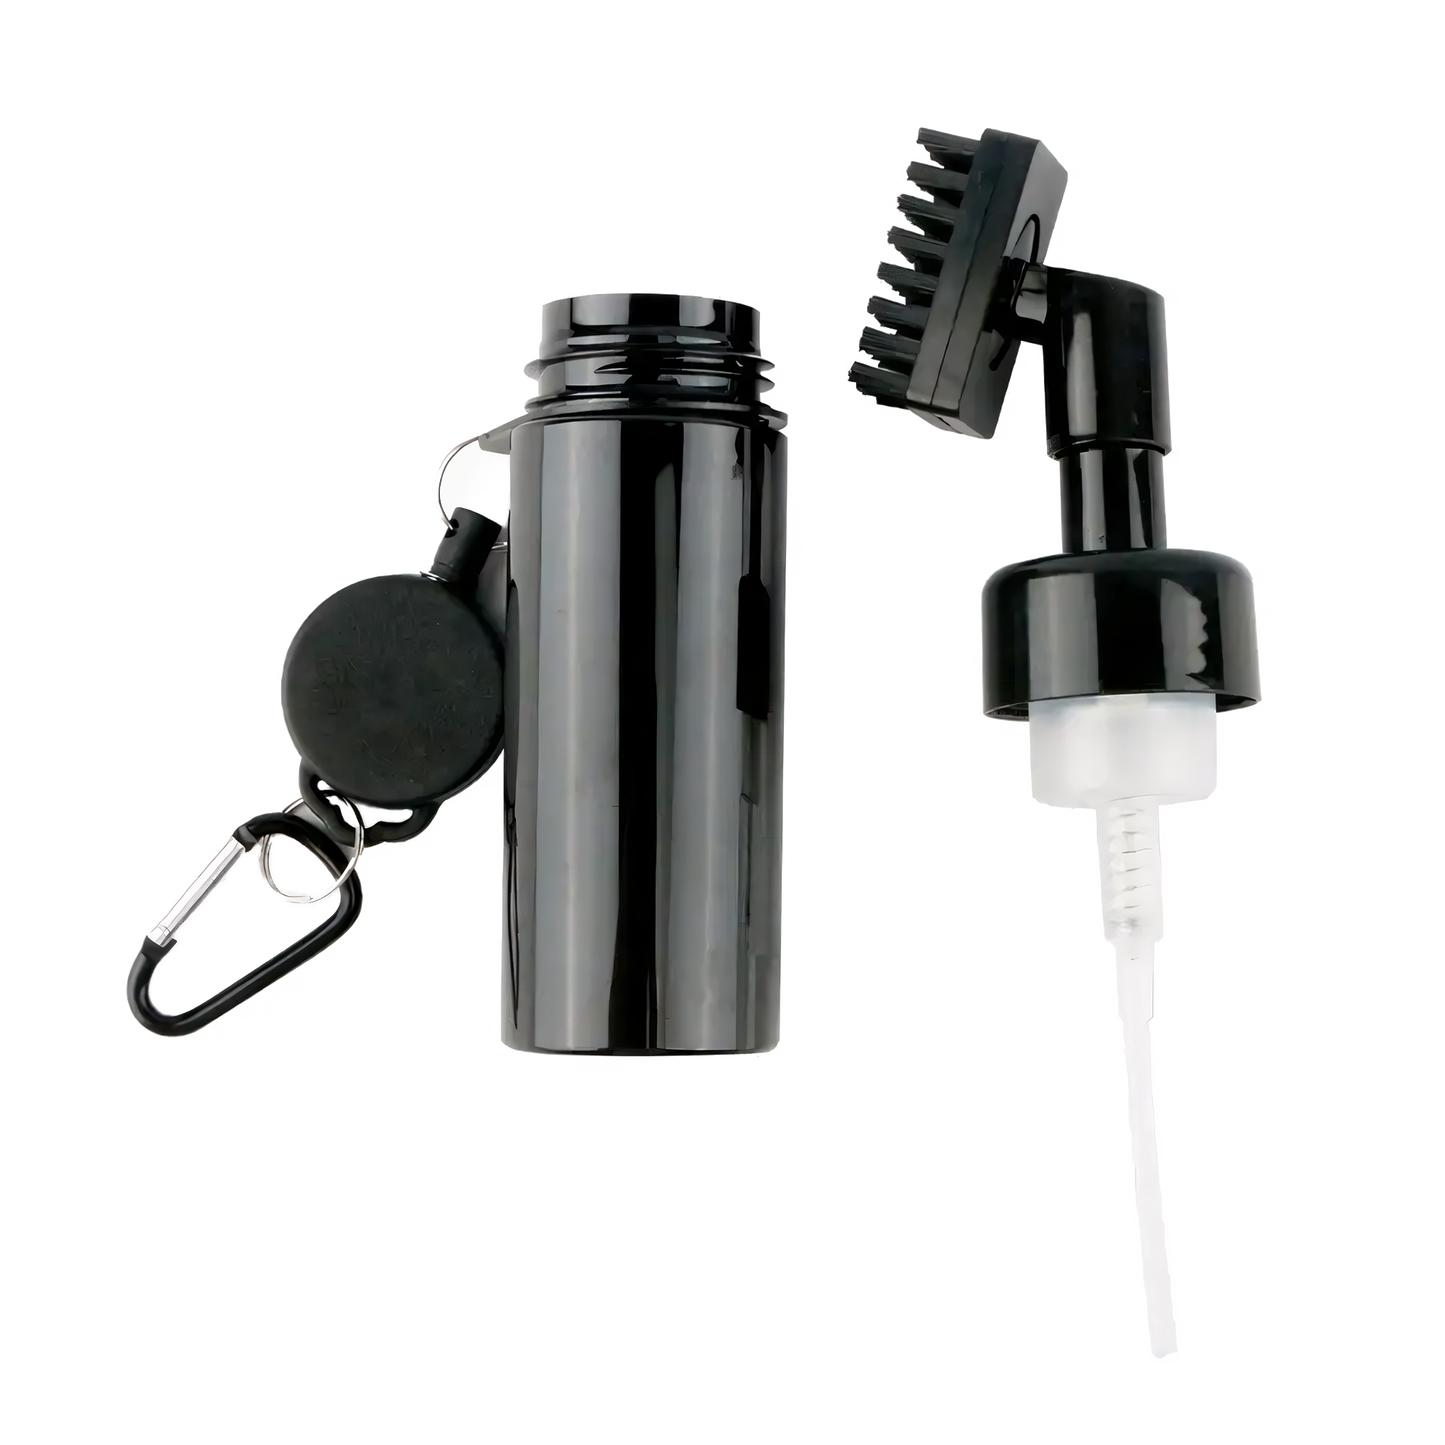 Innovative golf club brush with press-type water dispenser for efficient on-course cleaning.